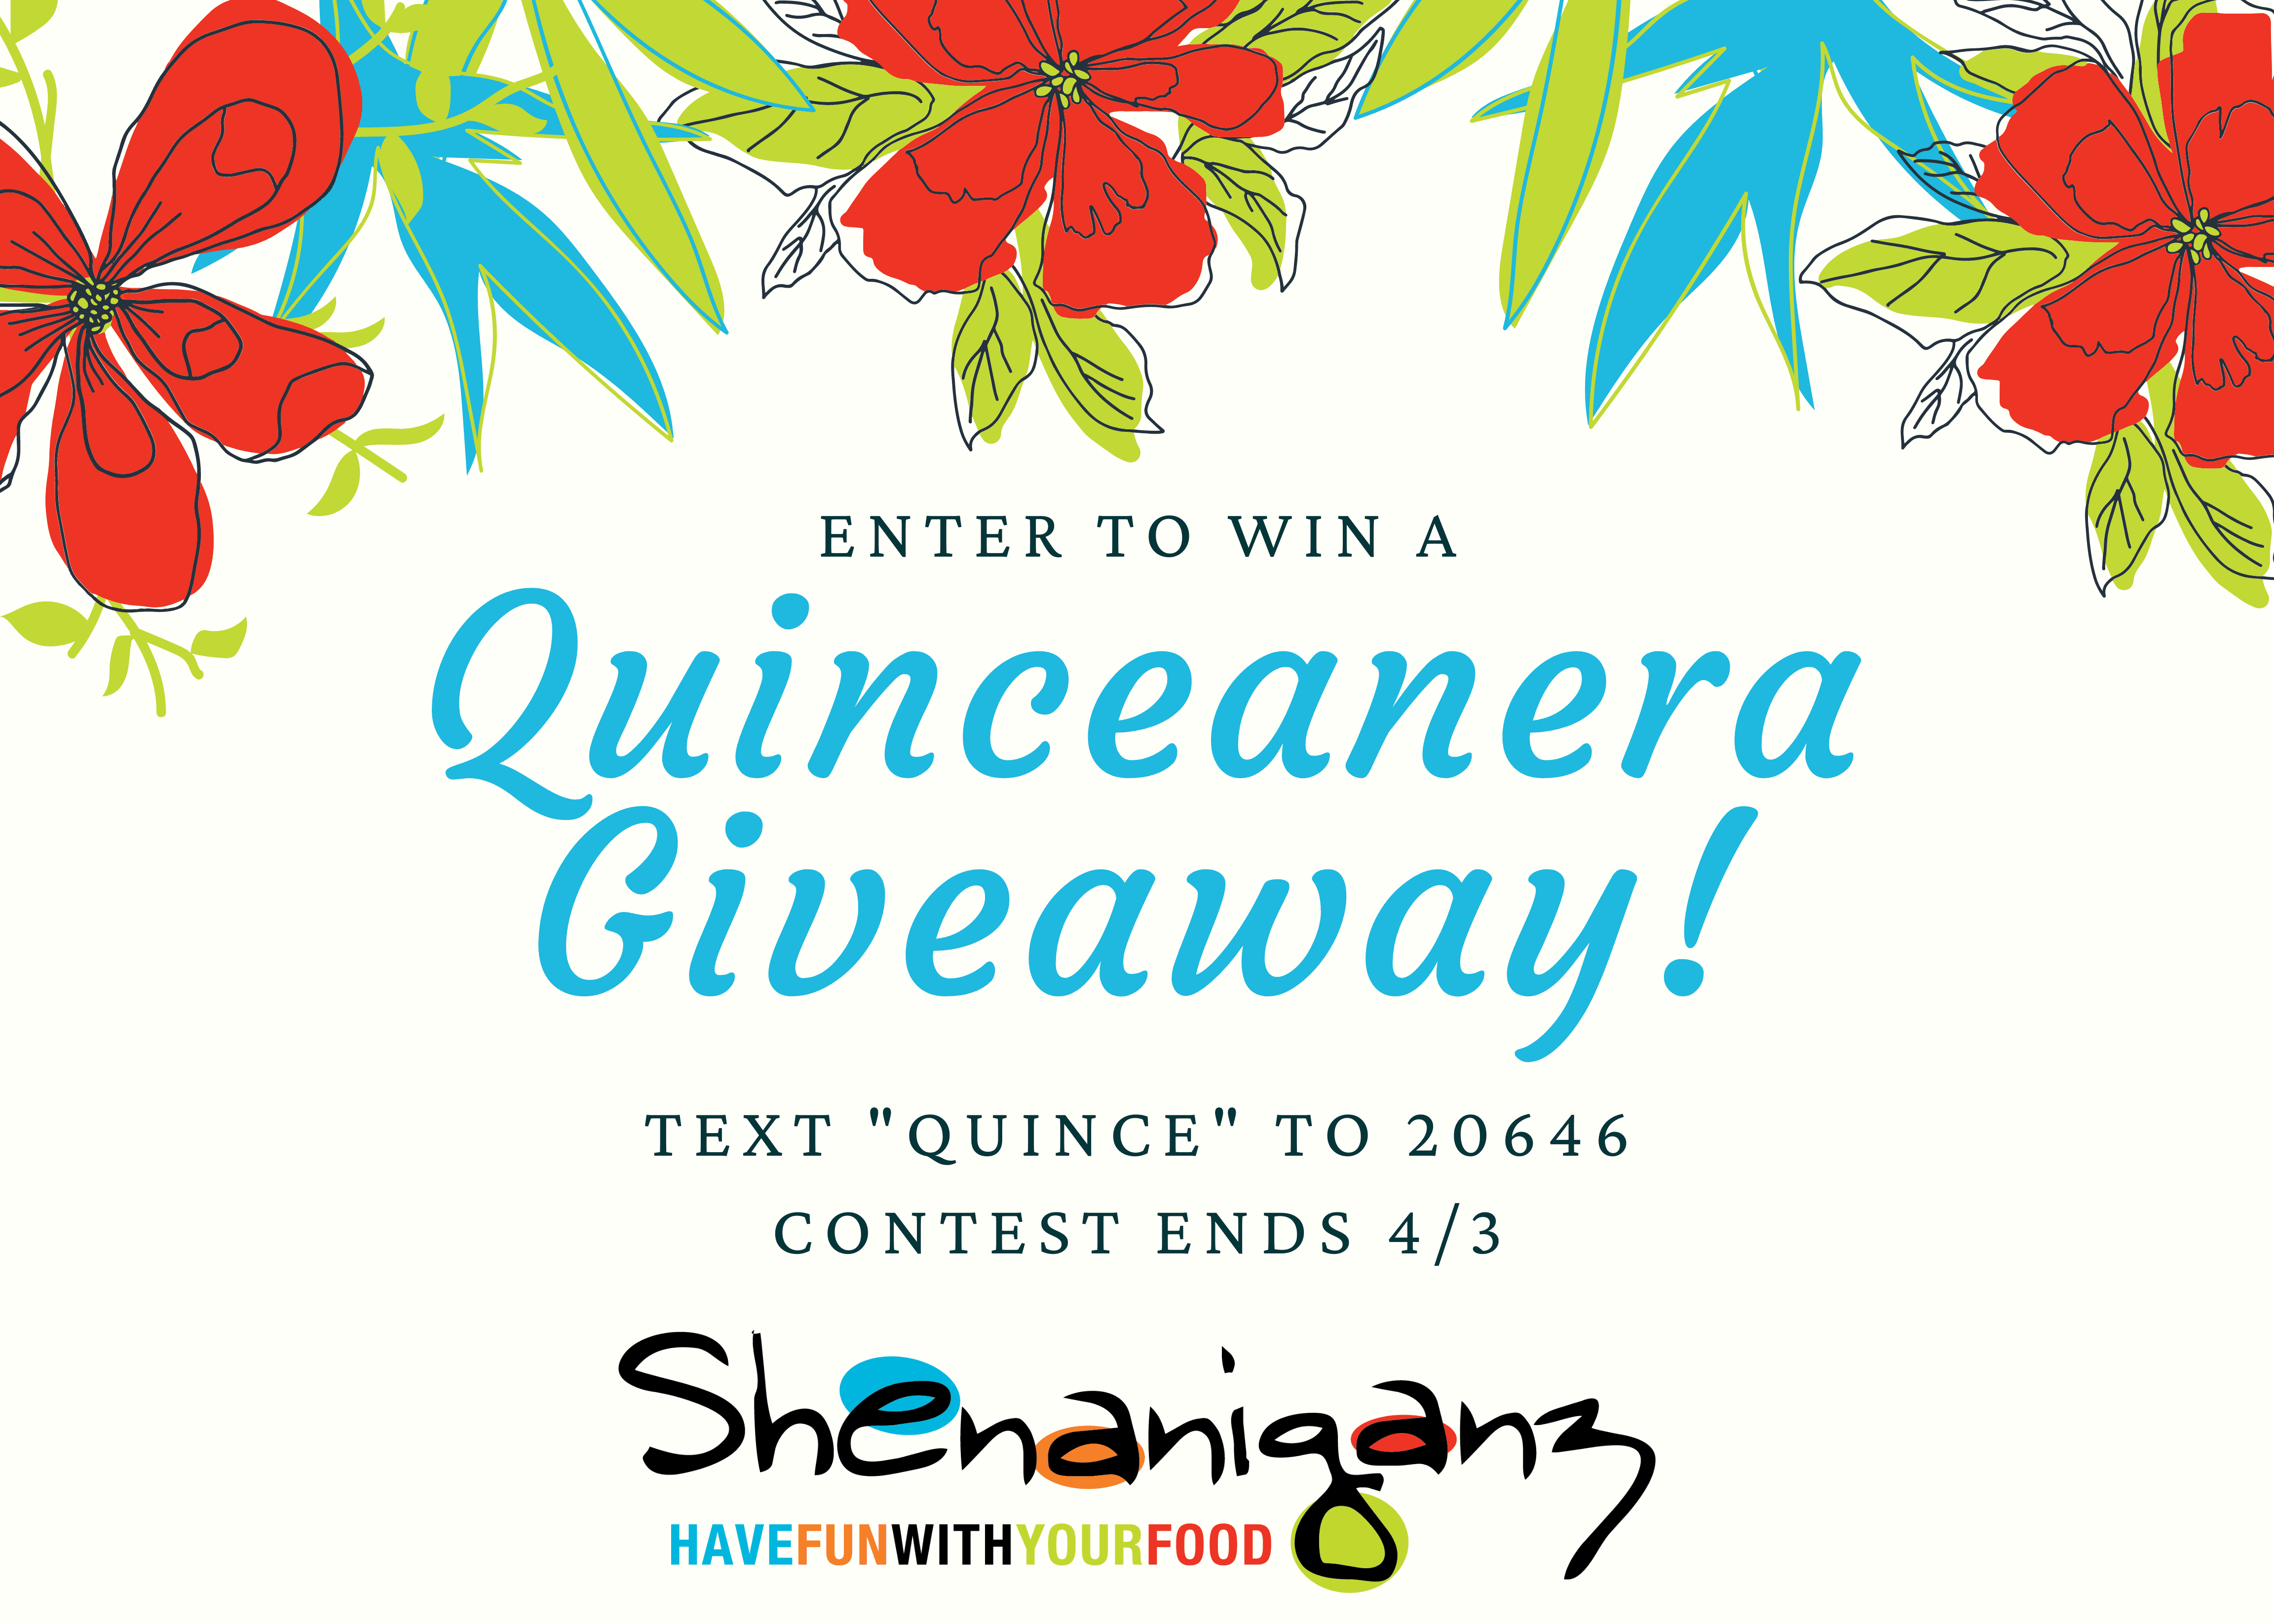 Shenaniganz' Quince Giveaway! 2